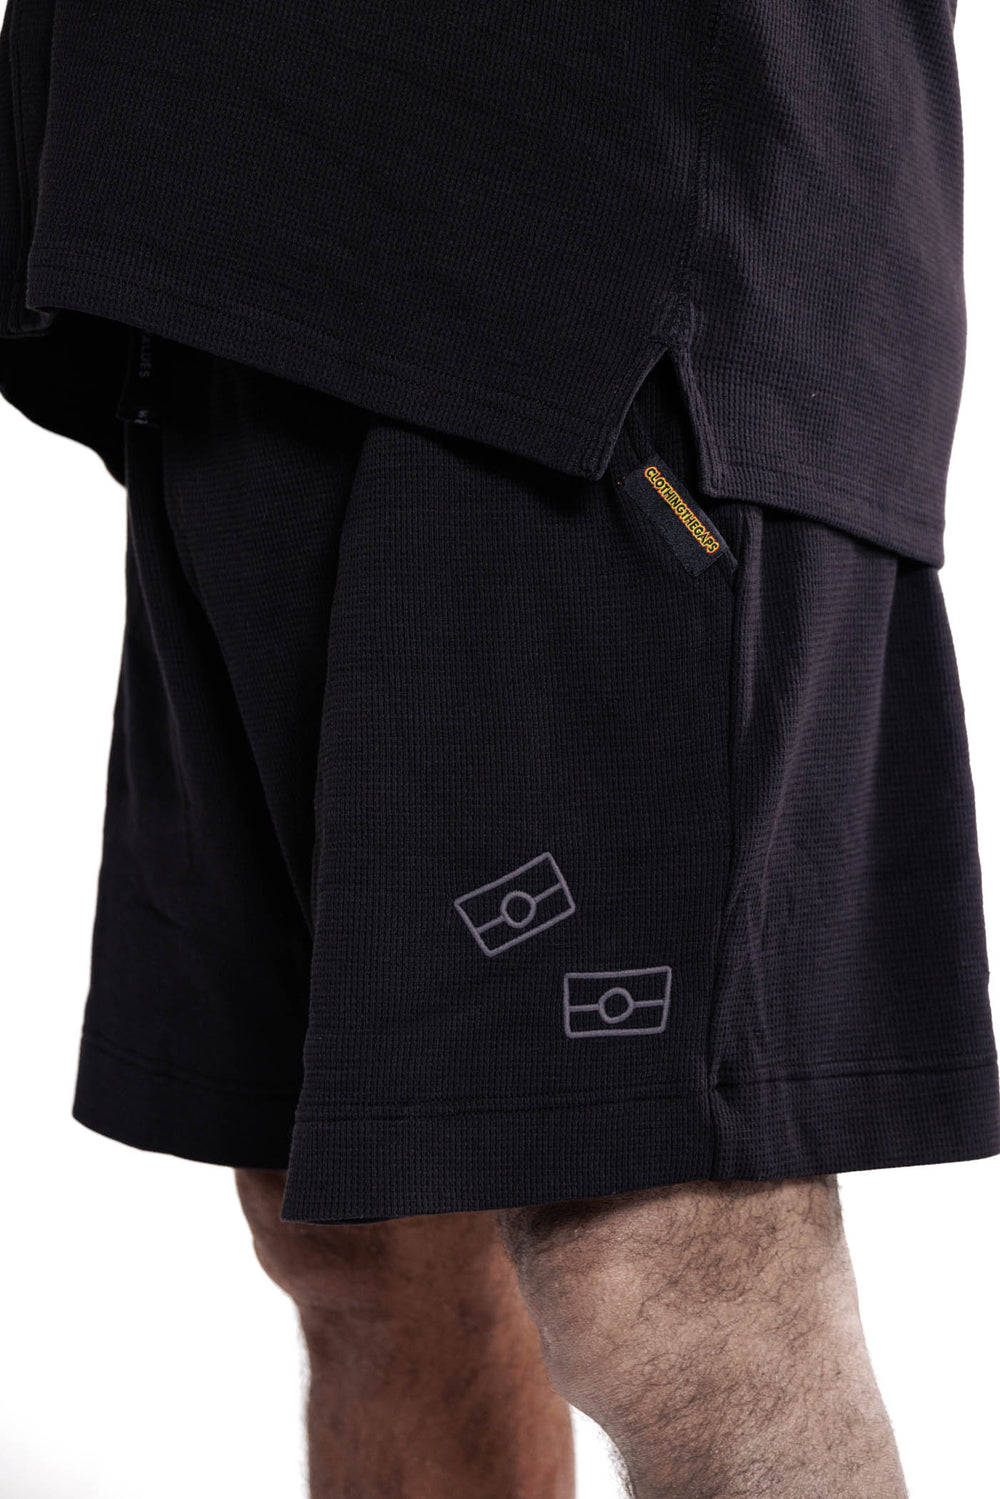 Clothing The Gaps. Waffle Shorts.  Cotton waffle material with 2 dark grey contrasting Aboriginal flag outlines on left leg of shorts. Deep pockets. 'wear your values' Draw string. Elastic waist. 